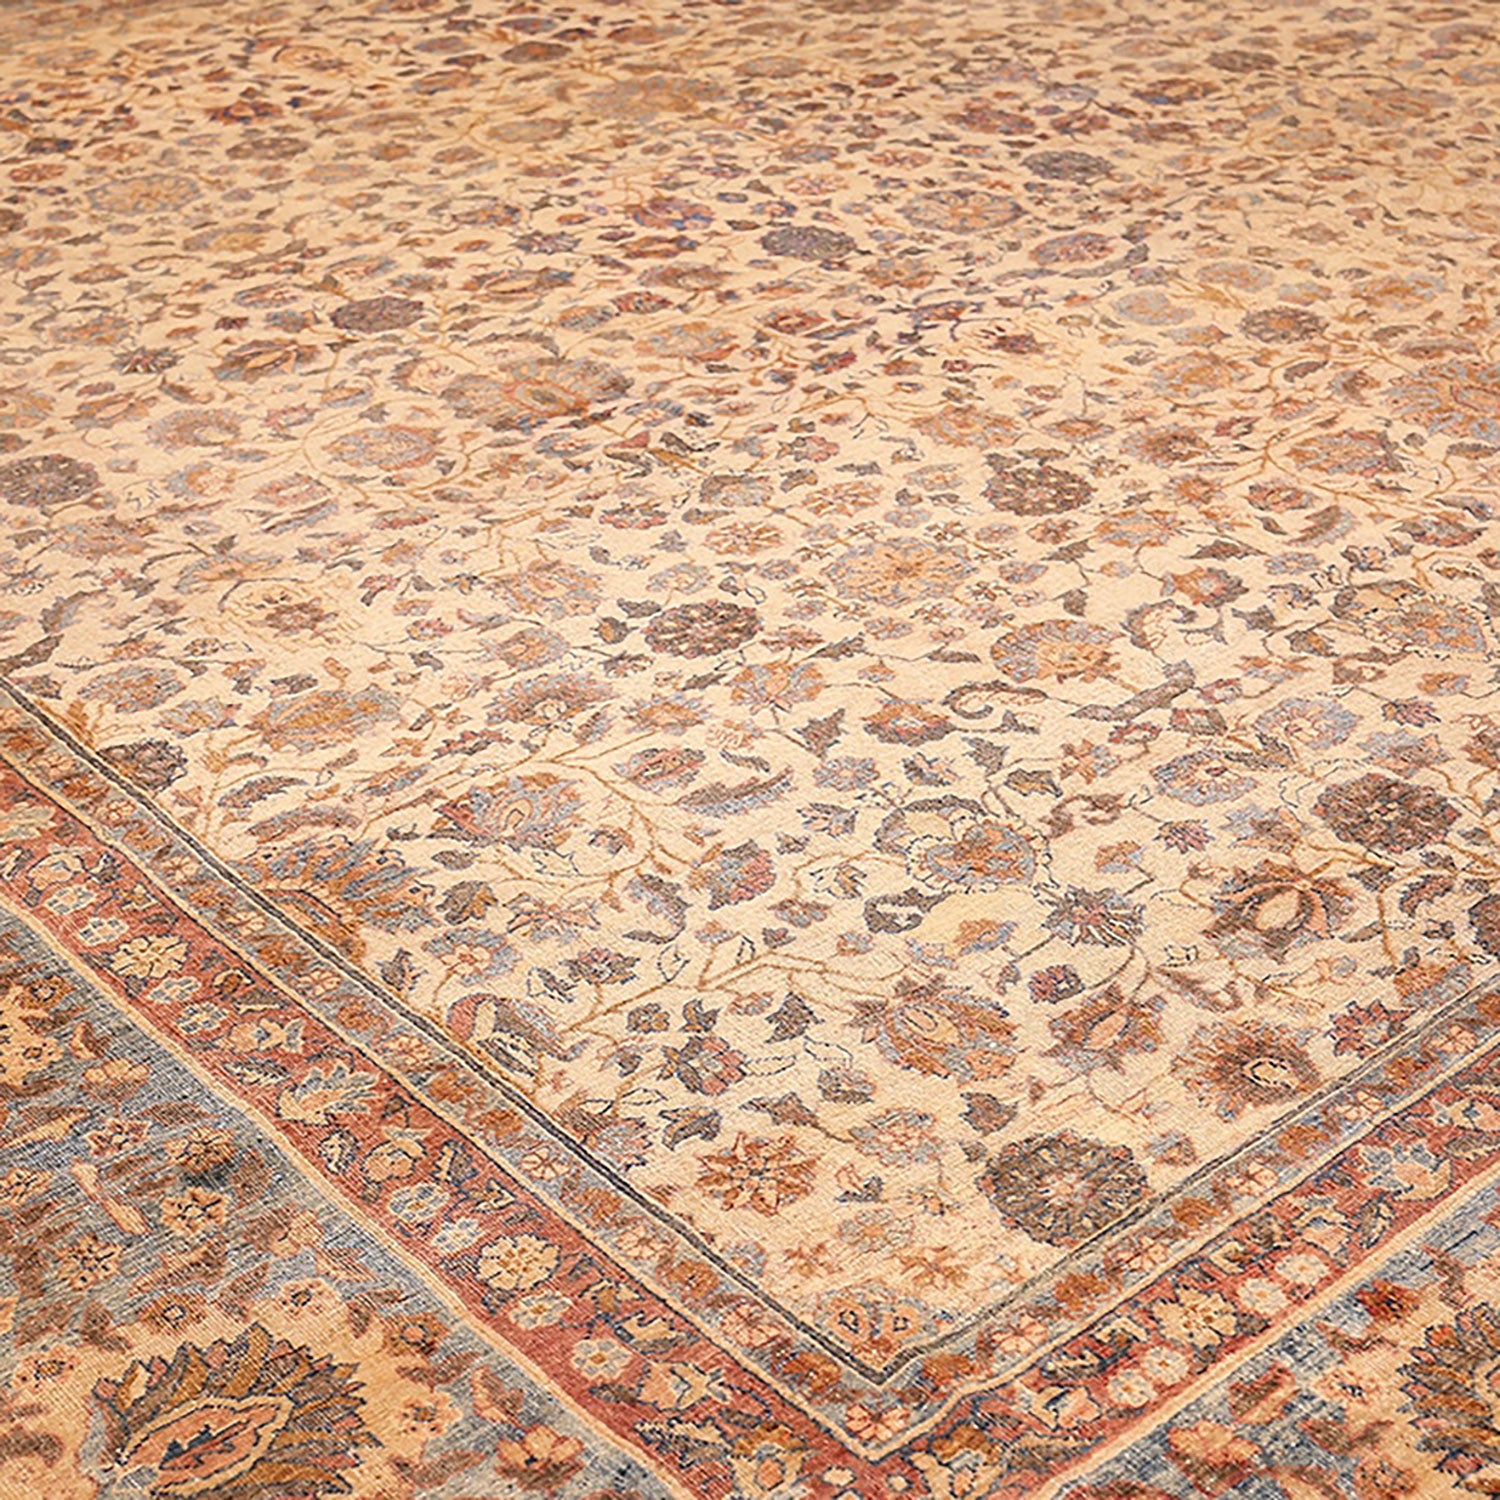 Close-up of a vibrant, handwoven floral patterned carpet brings comfort.